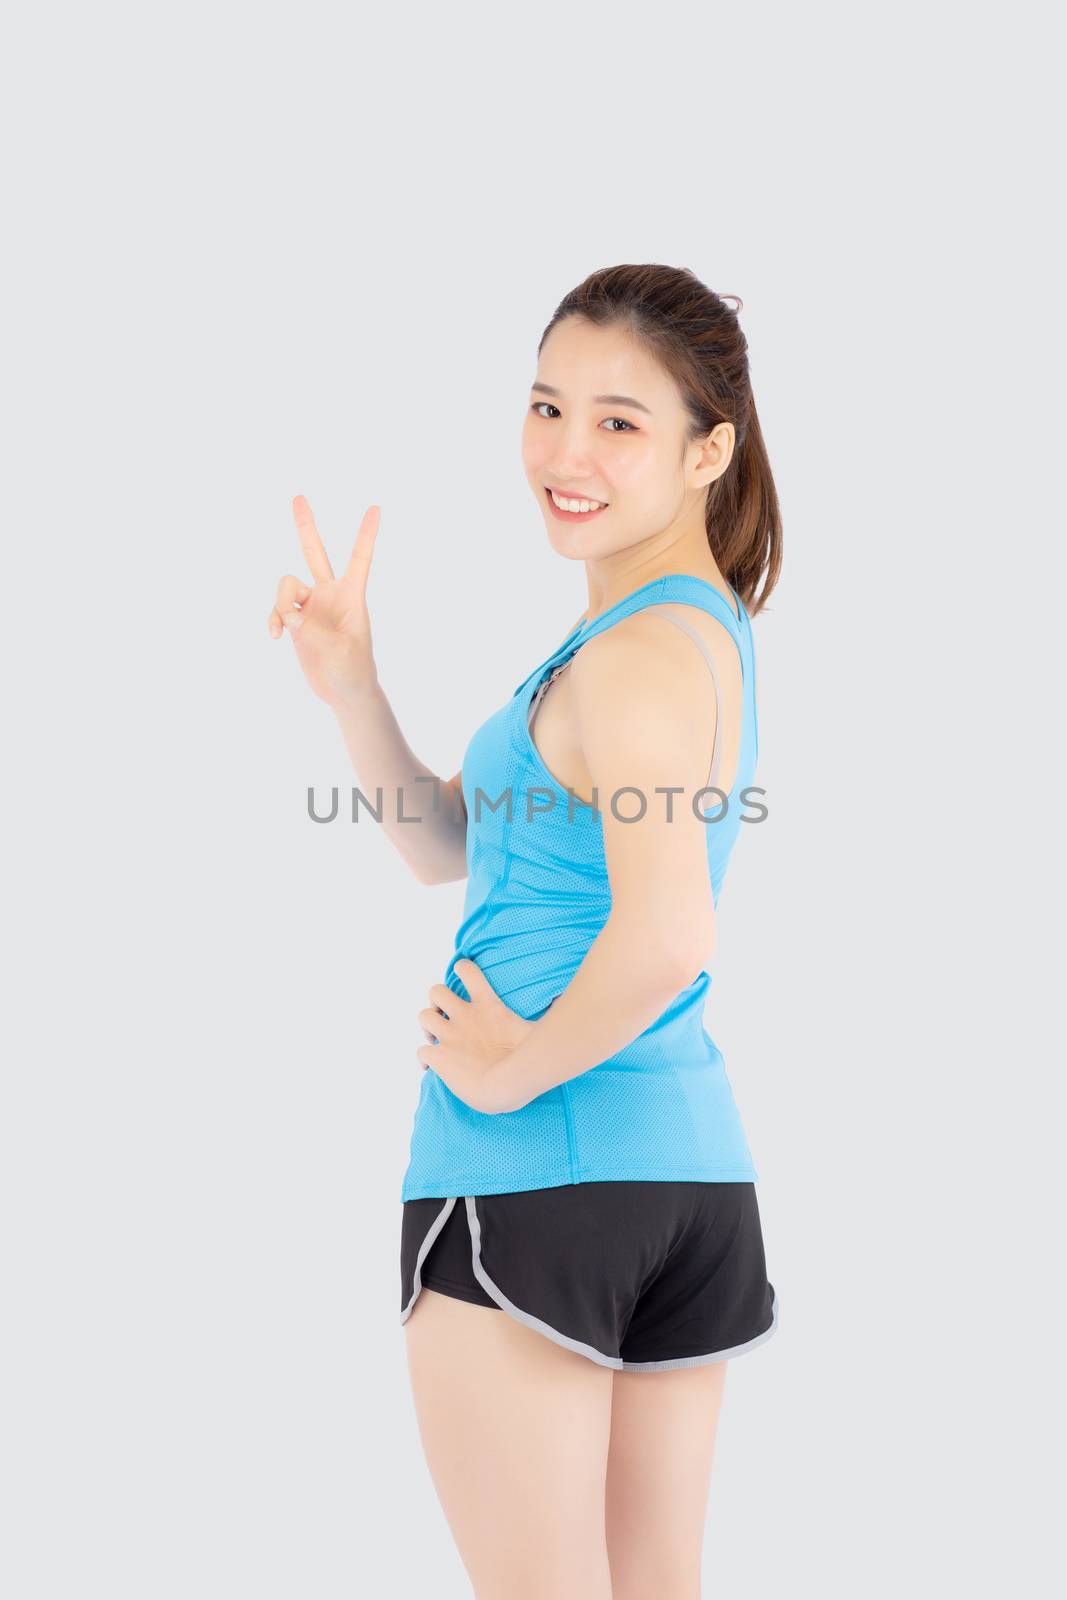 Beautiful portrait young asian woman in sport clothes with satisfied and confident gesture finger v sign isolated on white background, asia girl have shape and wellness, exercise for fit with health.